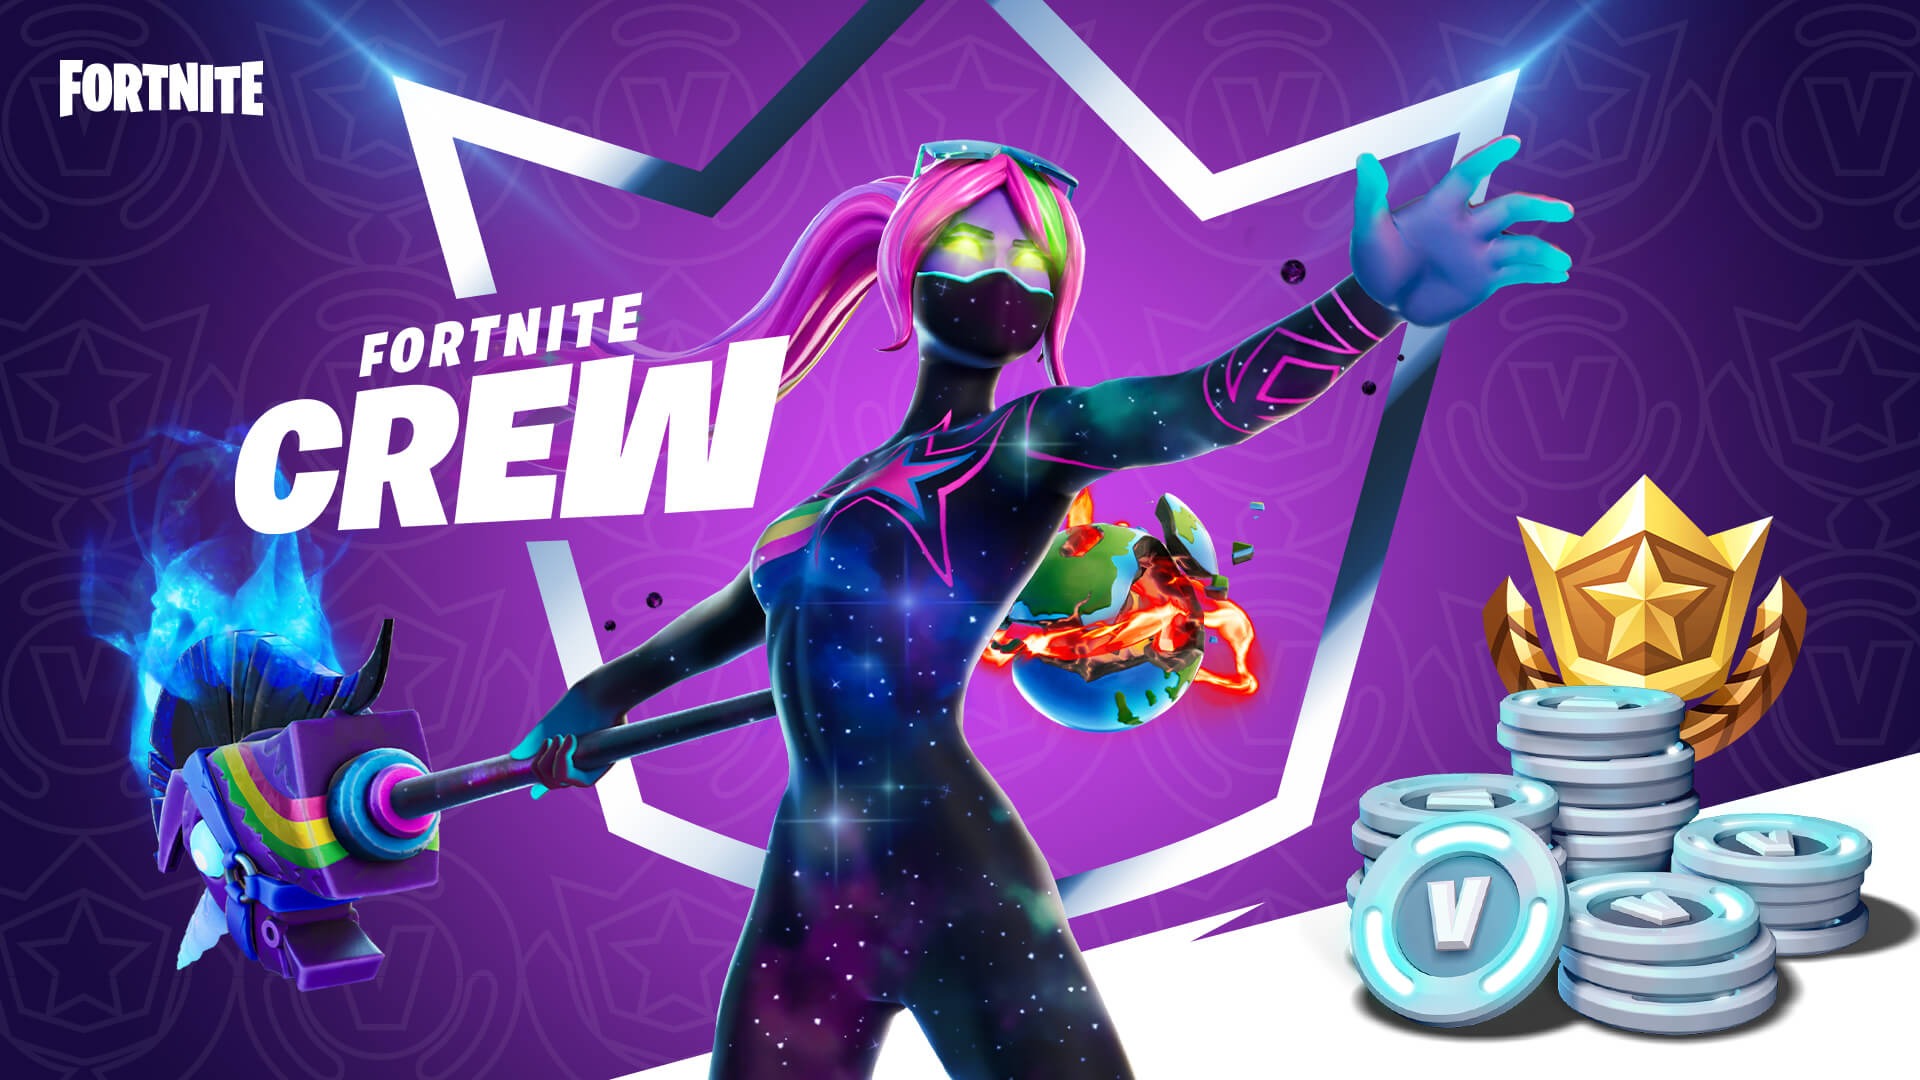 Fortnite goes galactic with spacethemed skin for new subscription